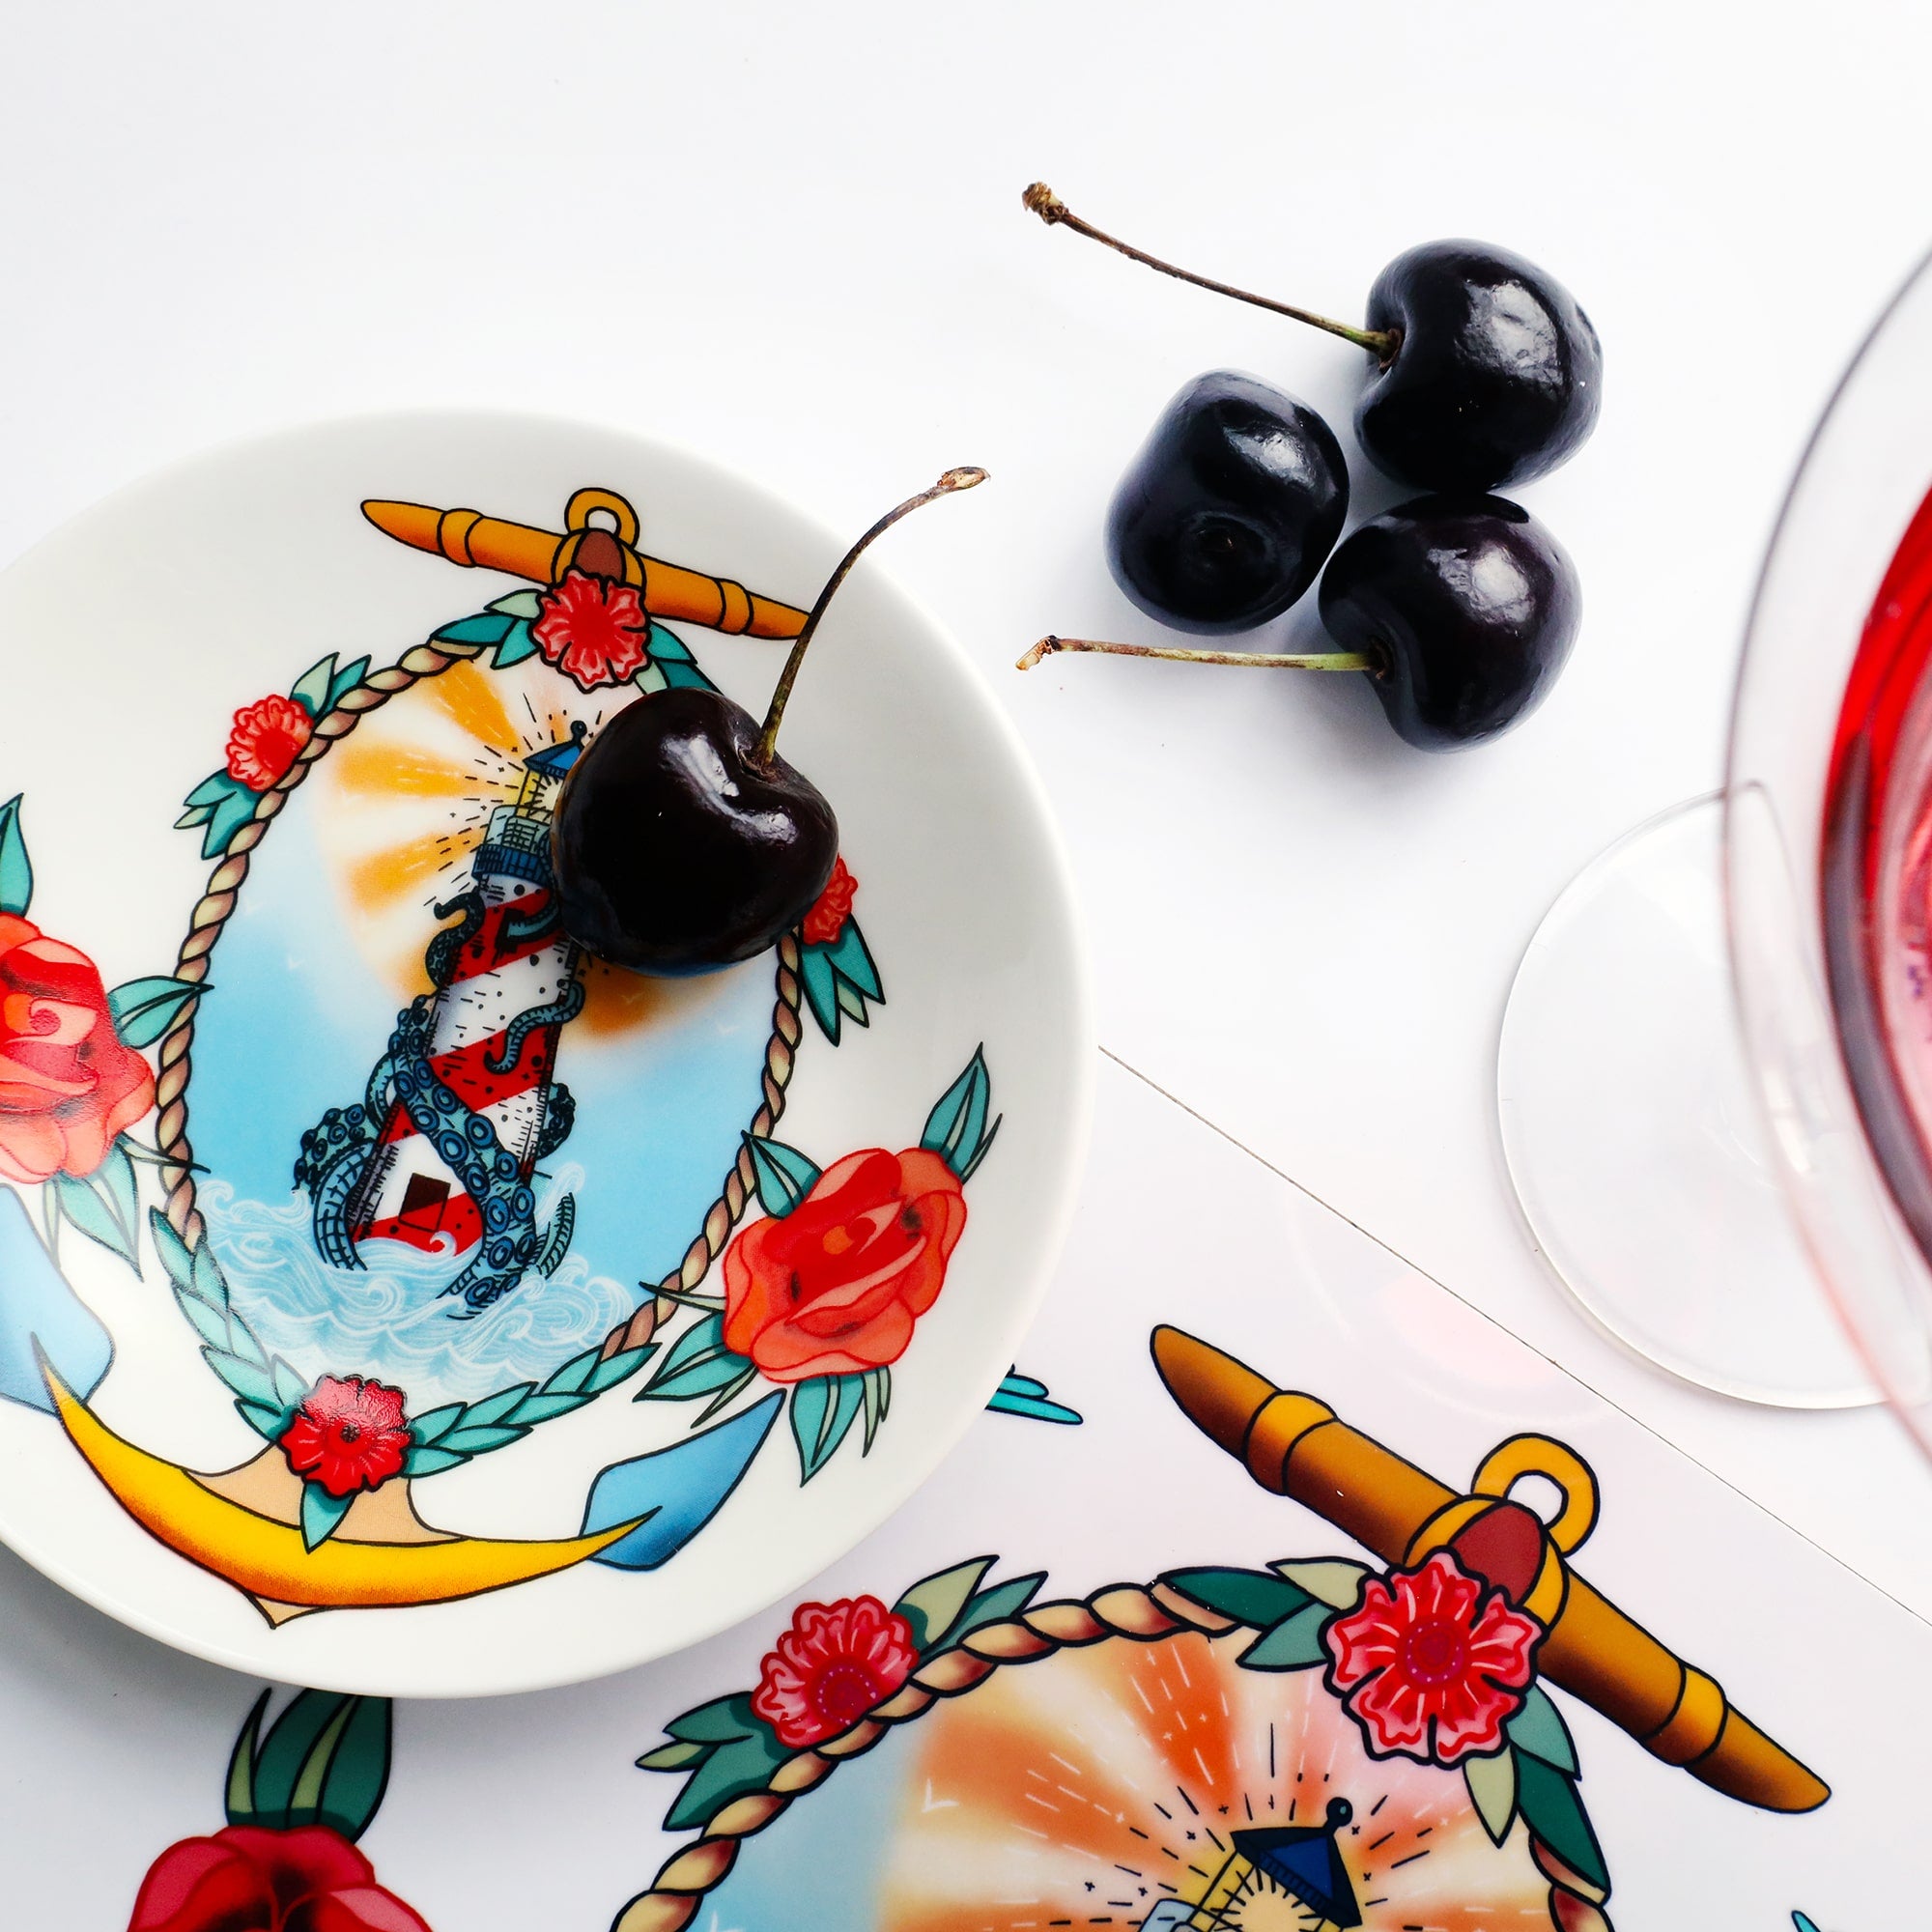 Nibbles dish with an illustration of a lighthouse  with kraken tentacles coming out, surrounded by a rope,anchor and roses. There is a cherry in the dish and 3 others next to it, you can also see a small amount of a placemat with the same design and the top of a cocktail glass just barely visible.